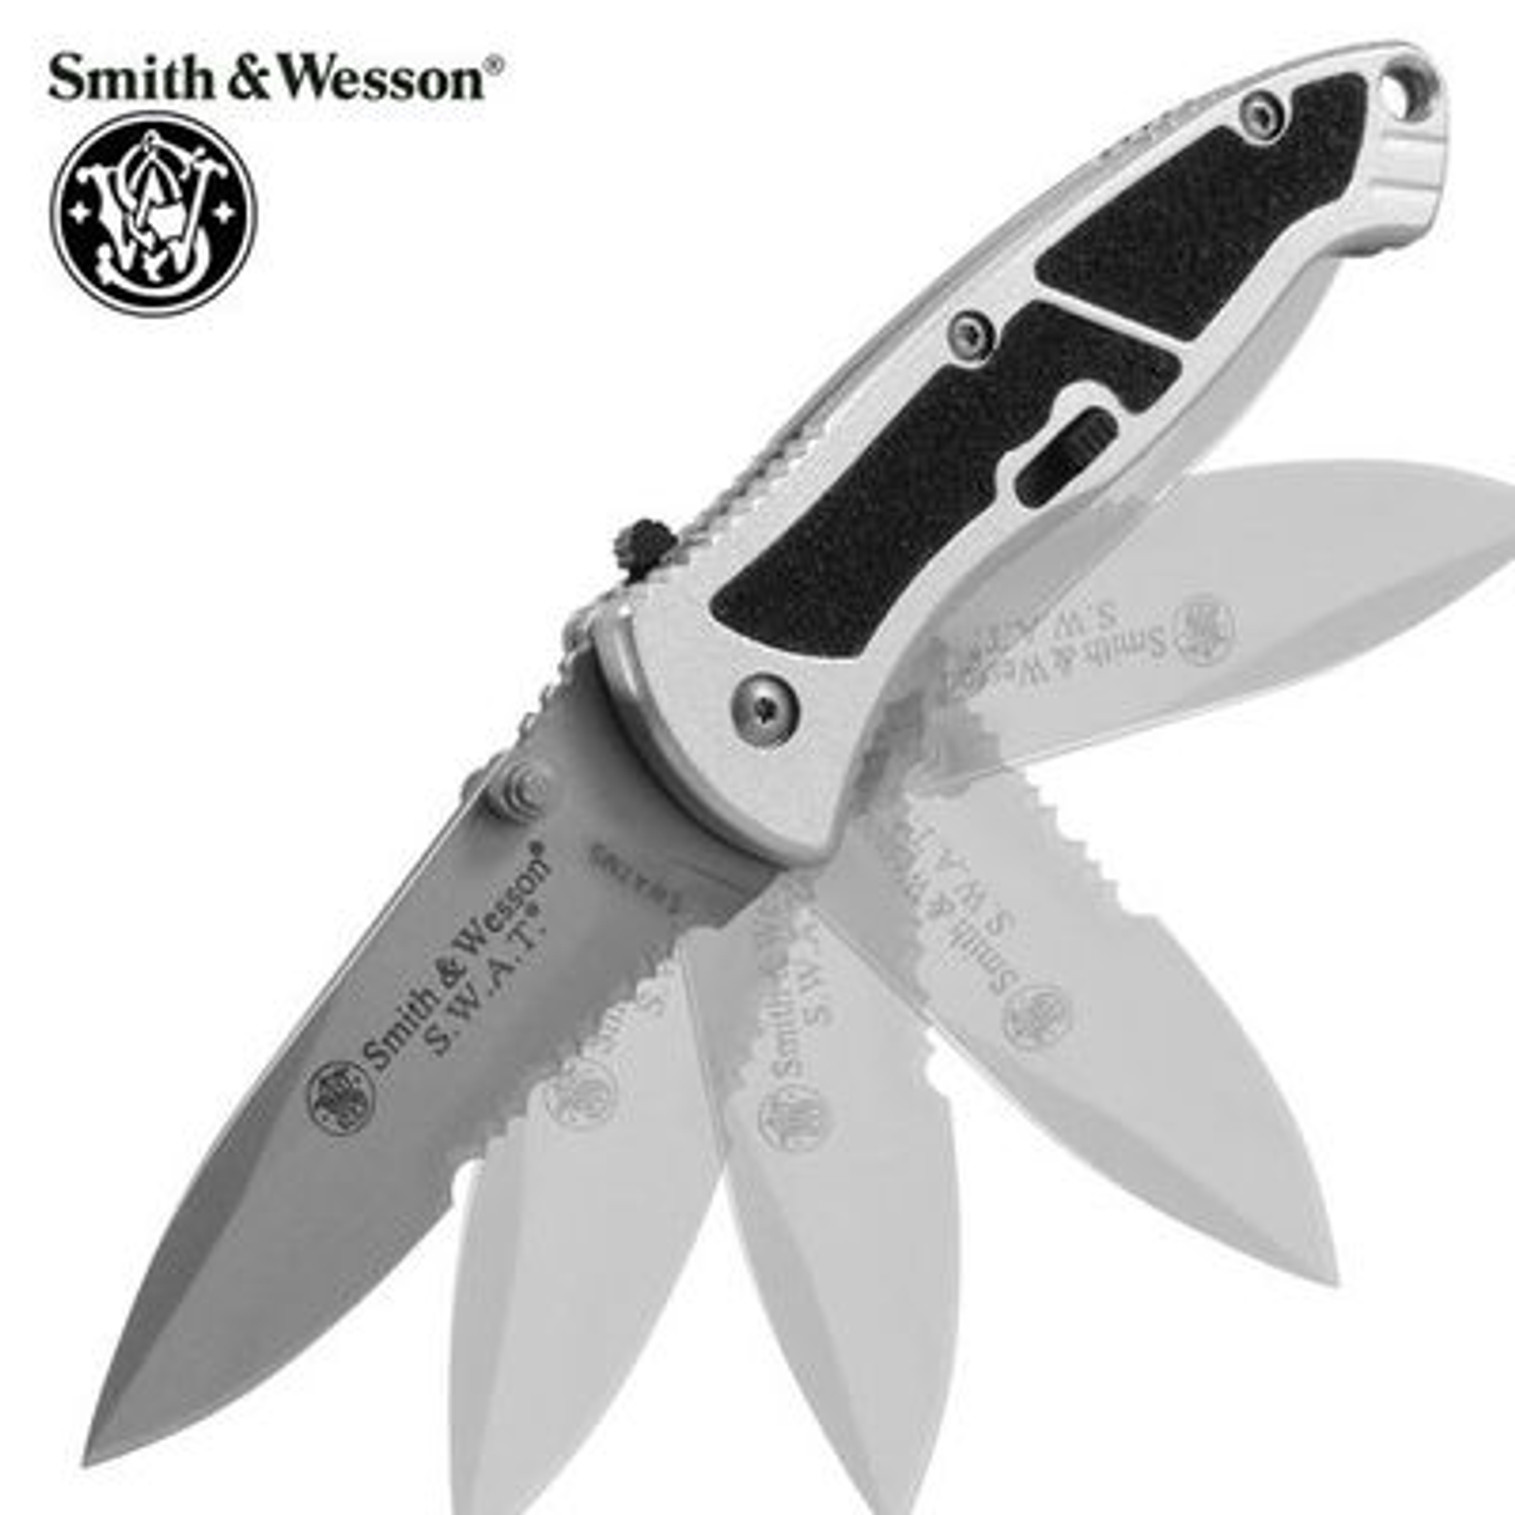 Smith & Wesson SWAT Serrated Assisted Opening Folding Knife